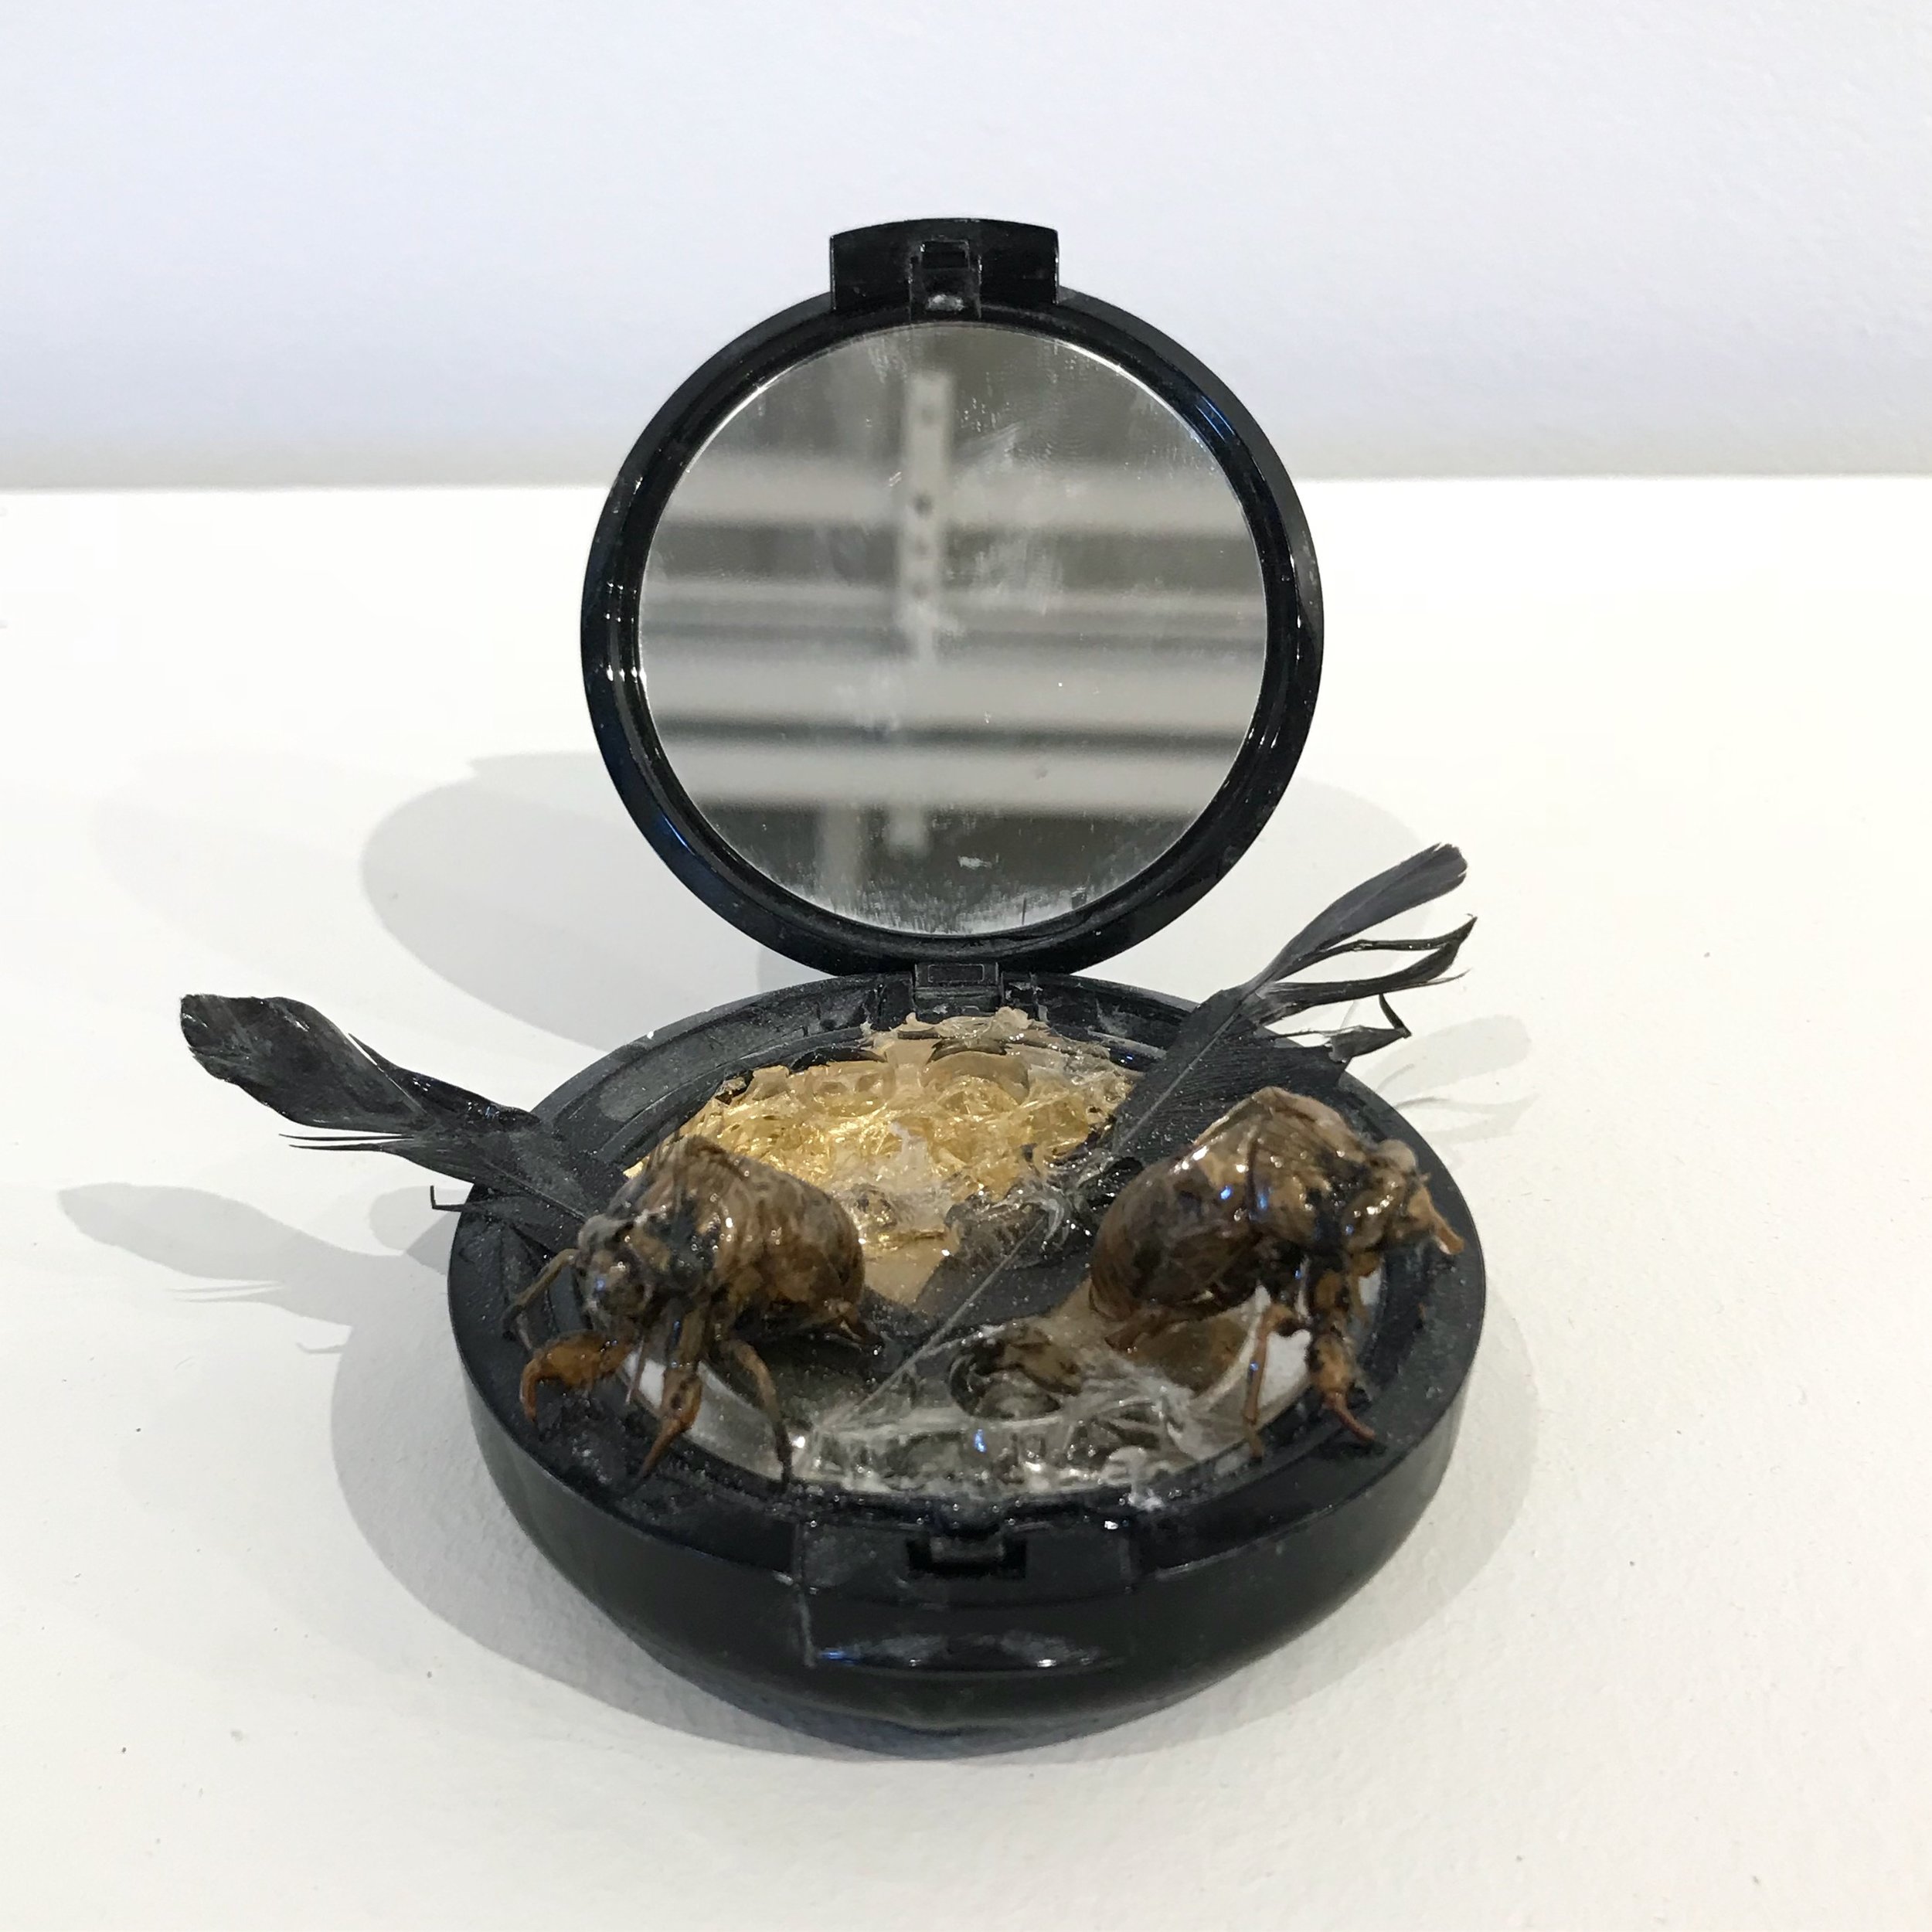   Makeup Compact No. 2,  2018, cicada shells, feathers, gold leaf, resin, and used makeup compact, 3x3x3” 